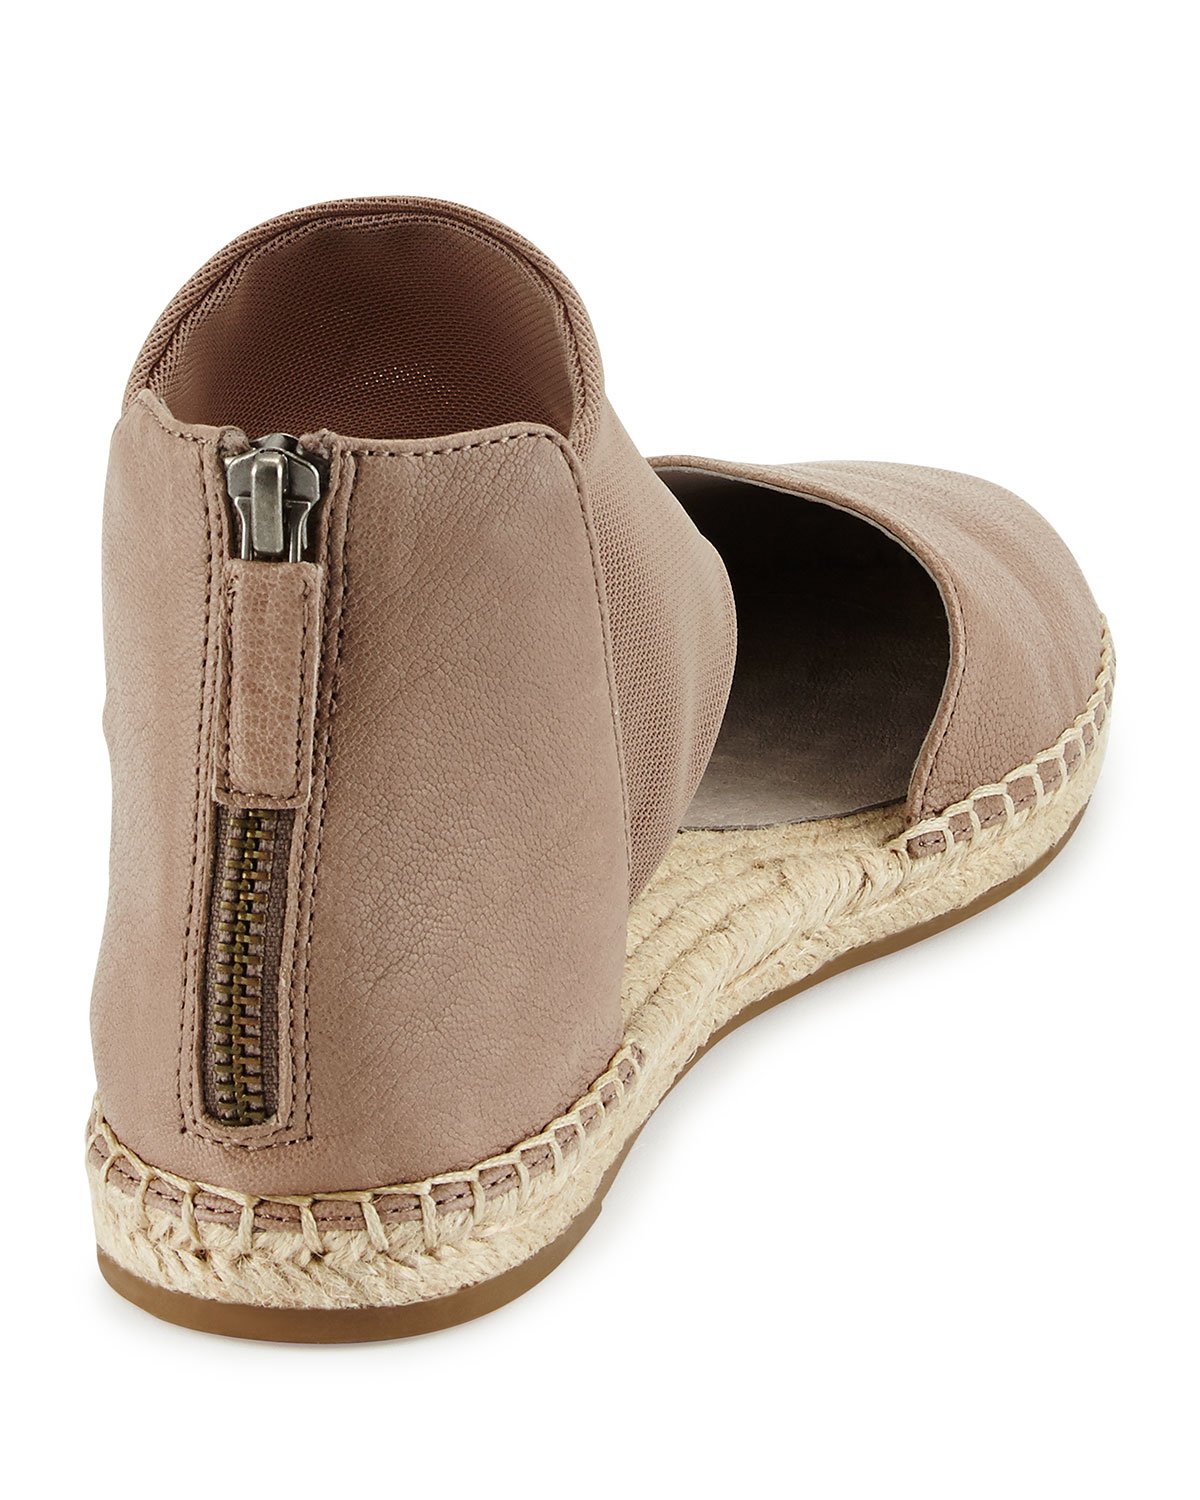 Lyst Eileen Fisher Coy Leather Espadrilles in Natural